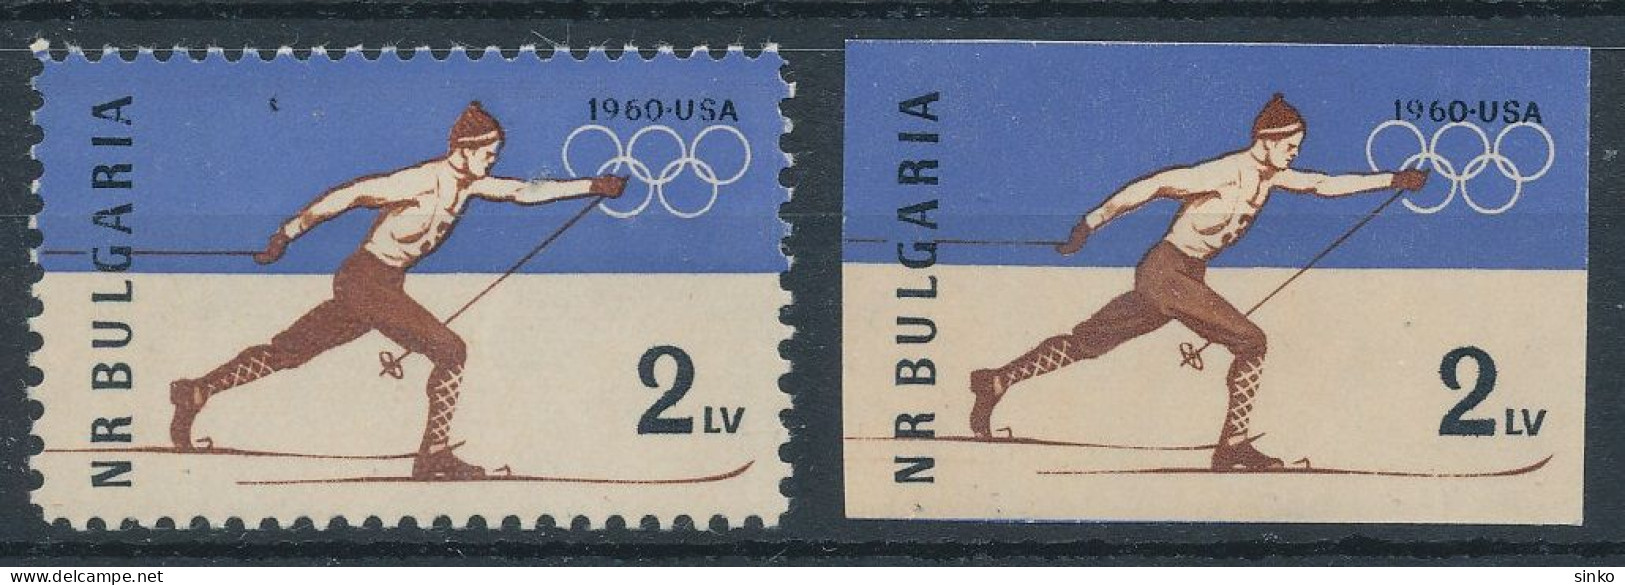 1960. Bulgaria - Olympic Games - Winter 1960: Squaw Valley